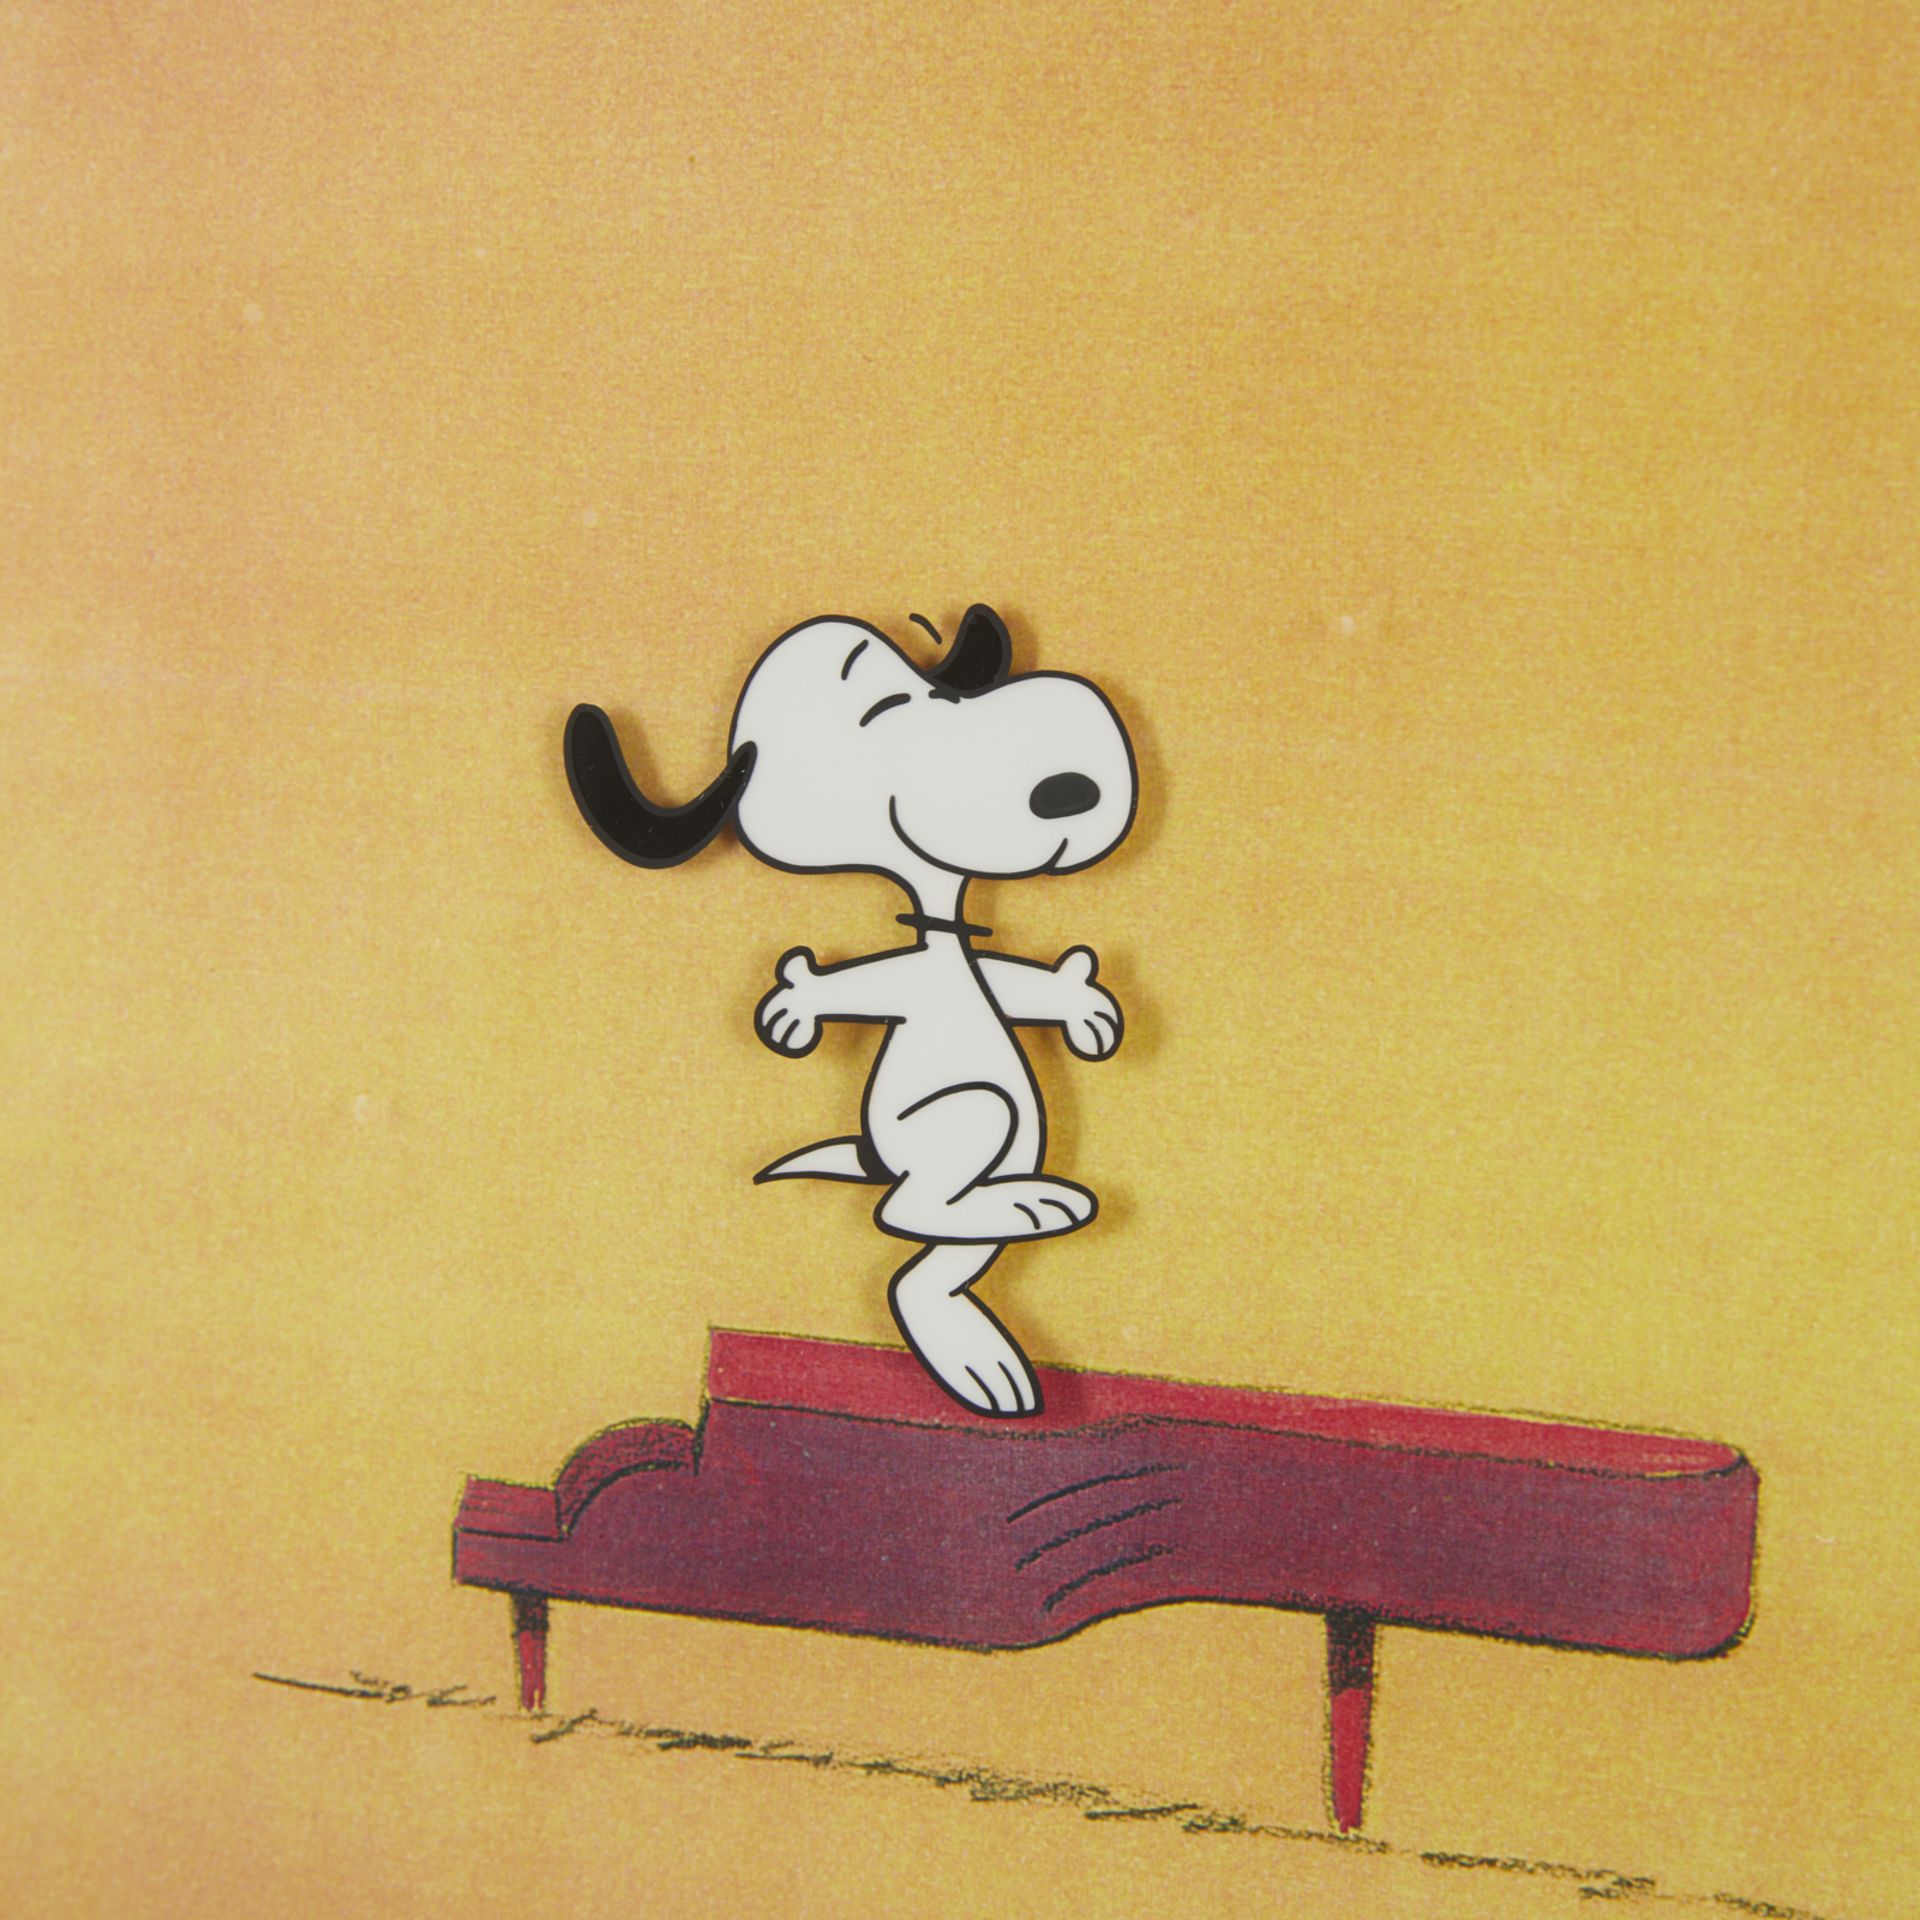 1970s Peanuts Animation Cel of Snoopy - Image 4 of 6